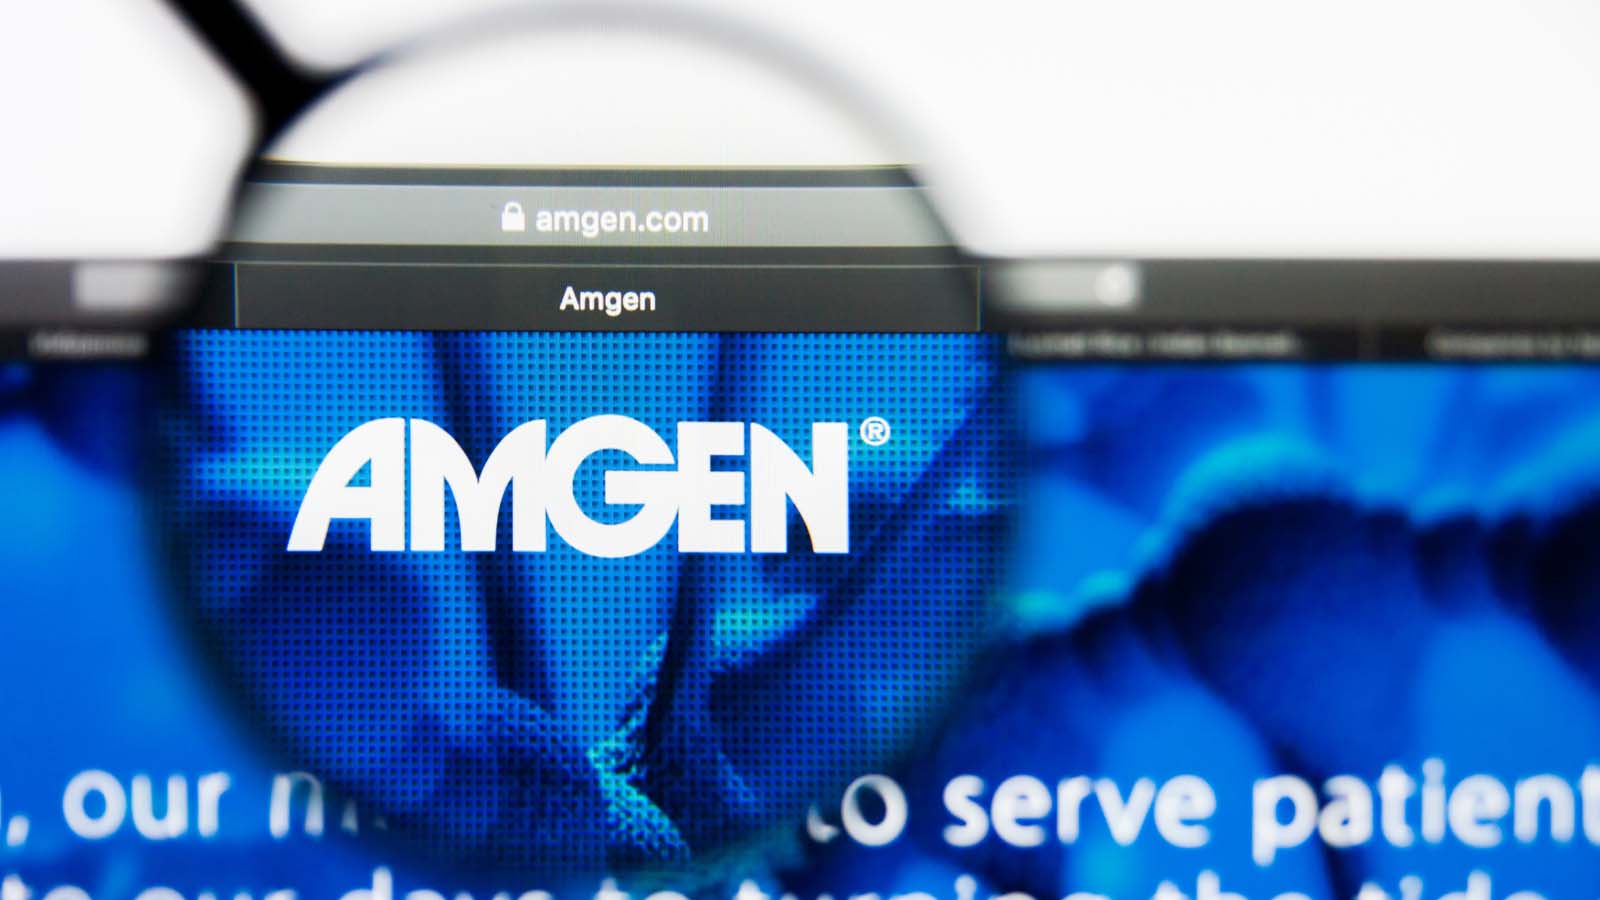 The Amgen (AMGN Stock) logo under a magnifying glass representing a deal for CCXI stock.